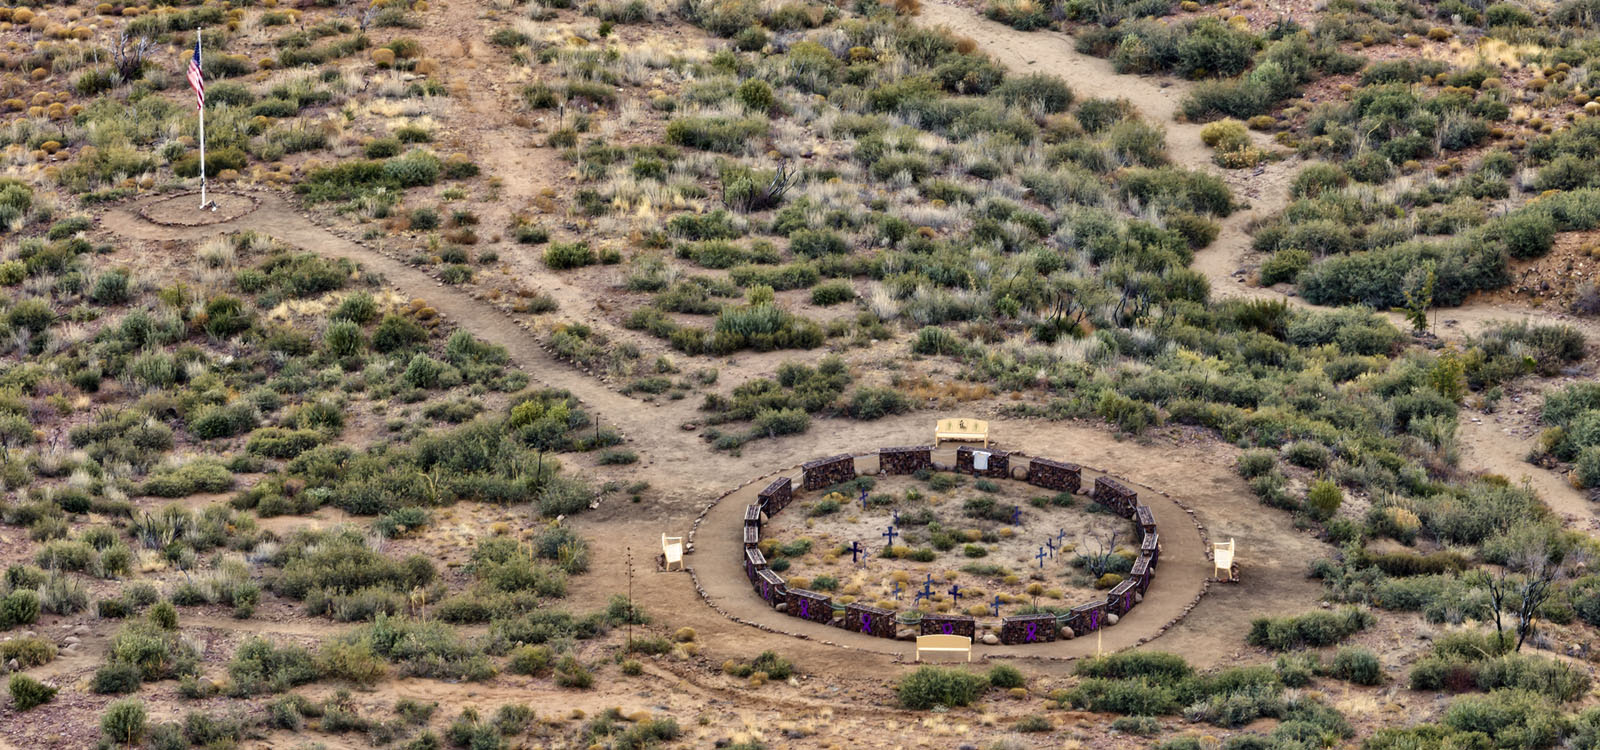 A view from above of the fatality site at Granite Mountain Hotshots Memorial State Park